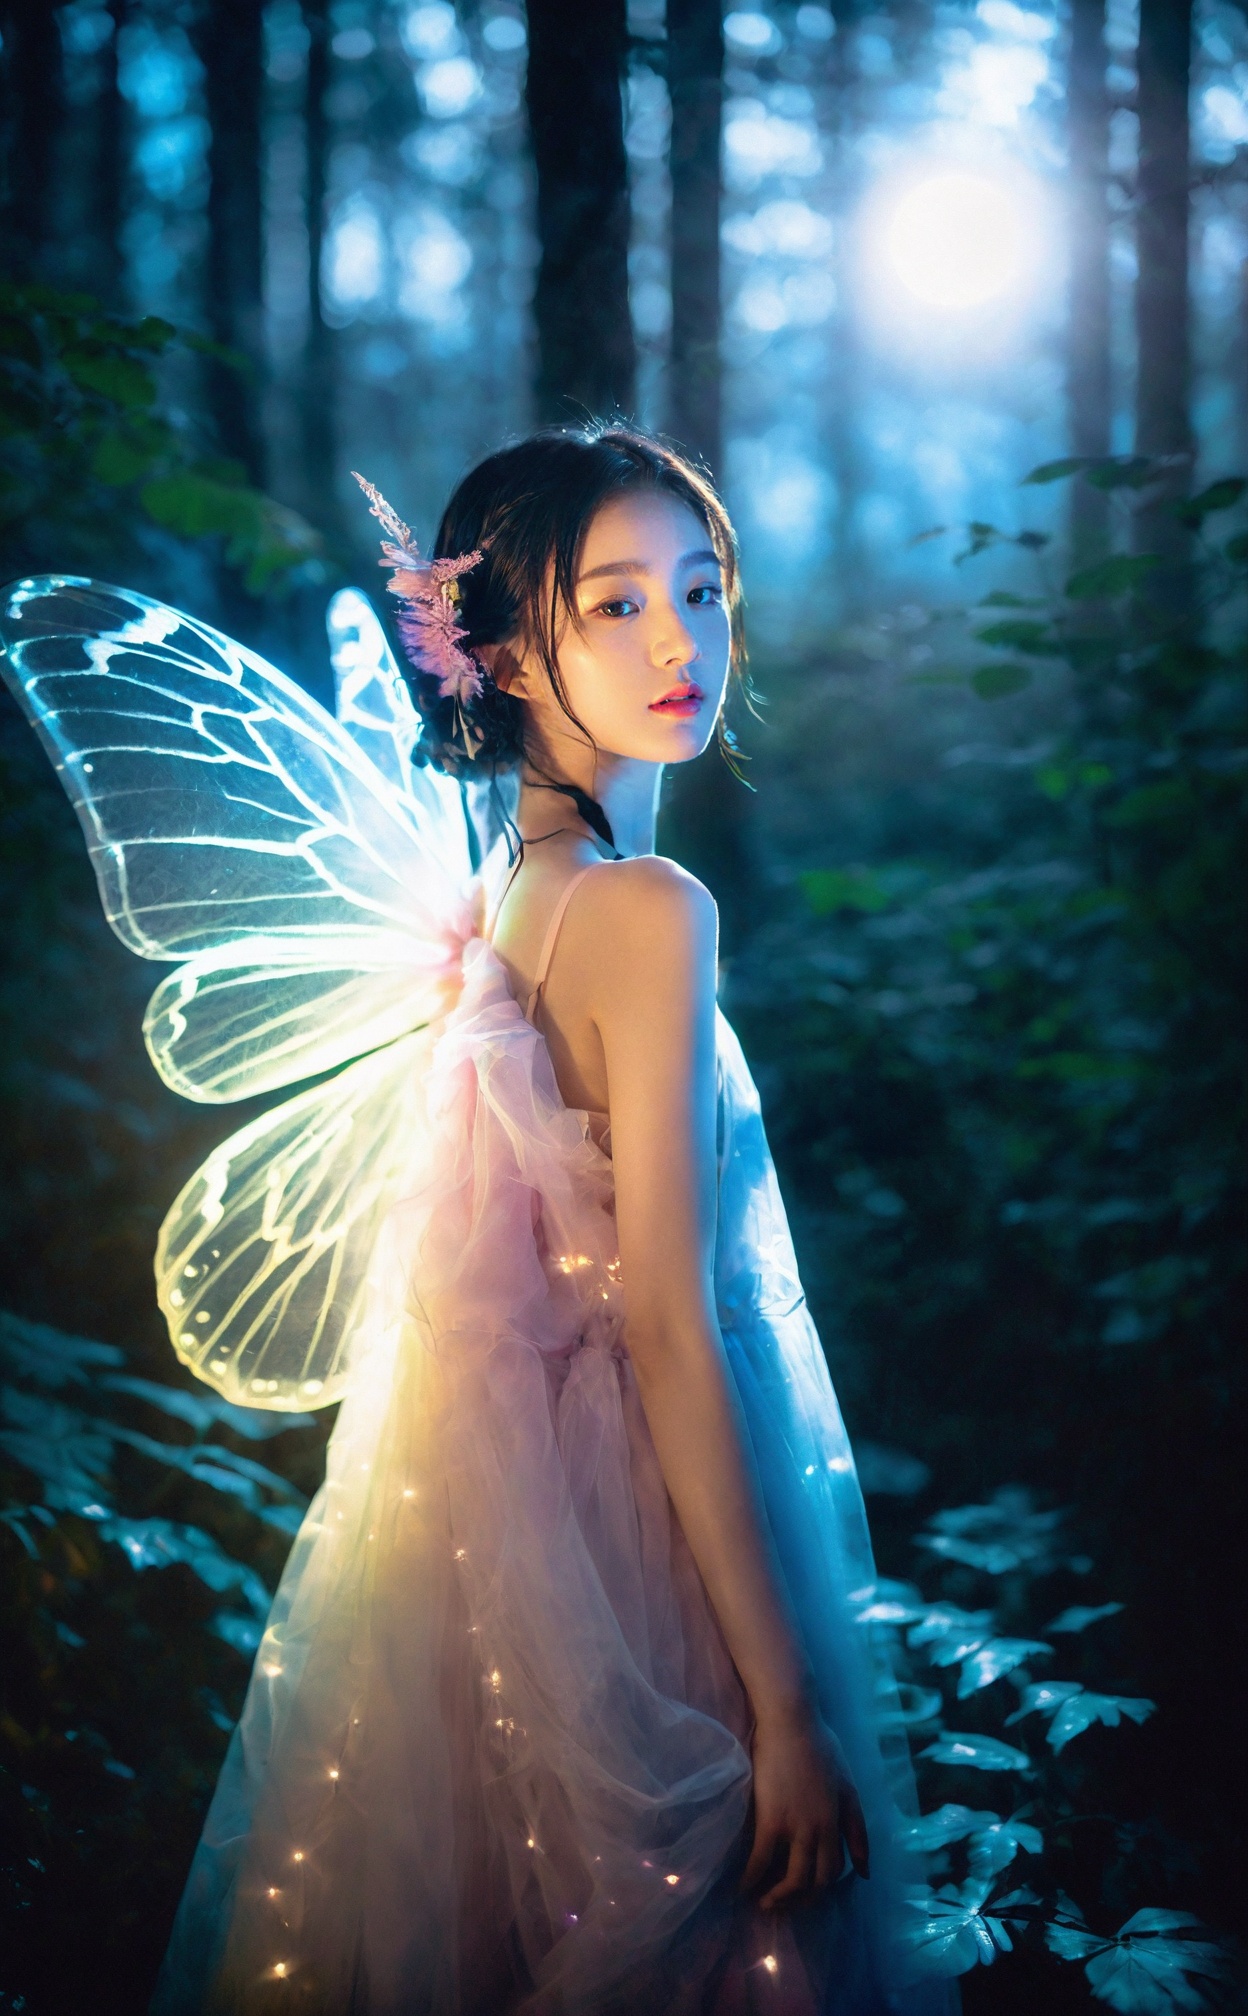 mugglelight,a girl with iridescent butterfly wings,bathed in the soft glow of a moonlit forest,enchanting atmosphere,magical expression,fantasy allure.,korean girl,black hair,